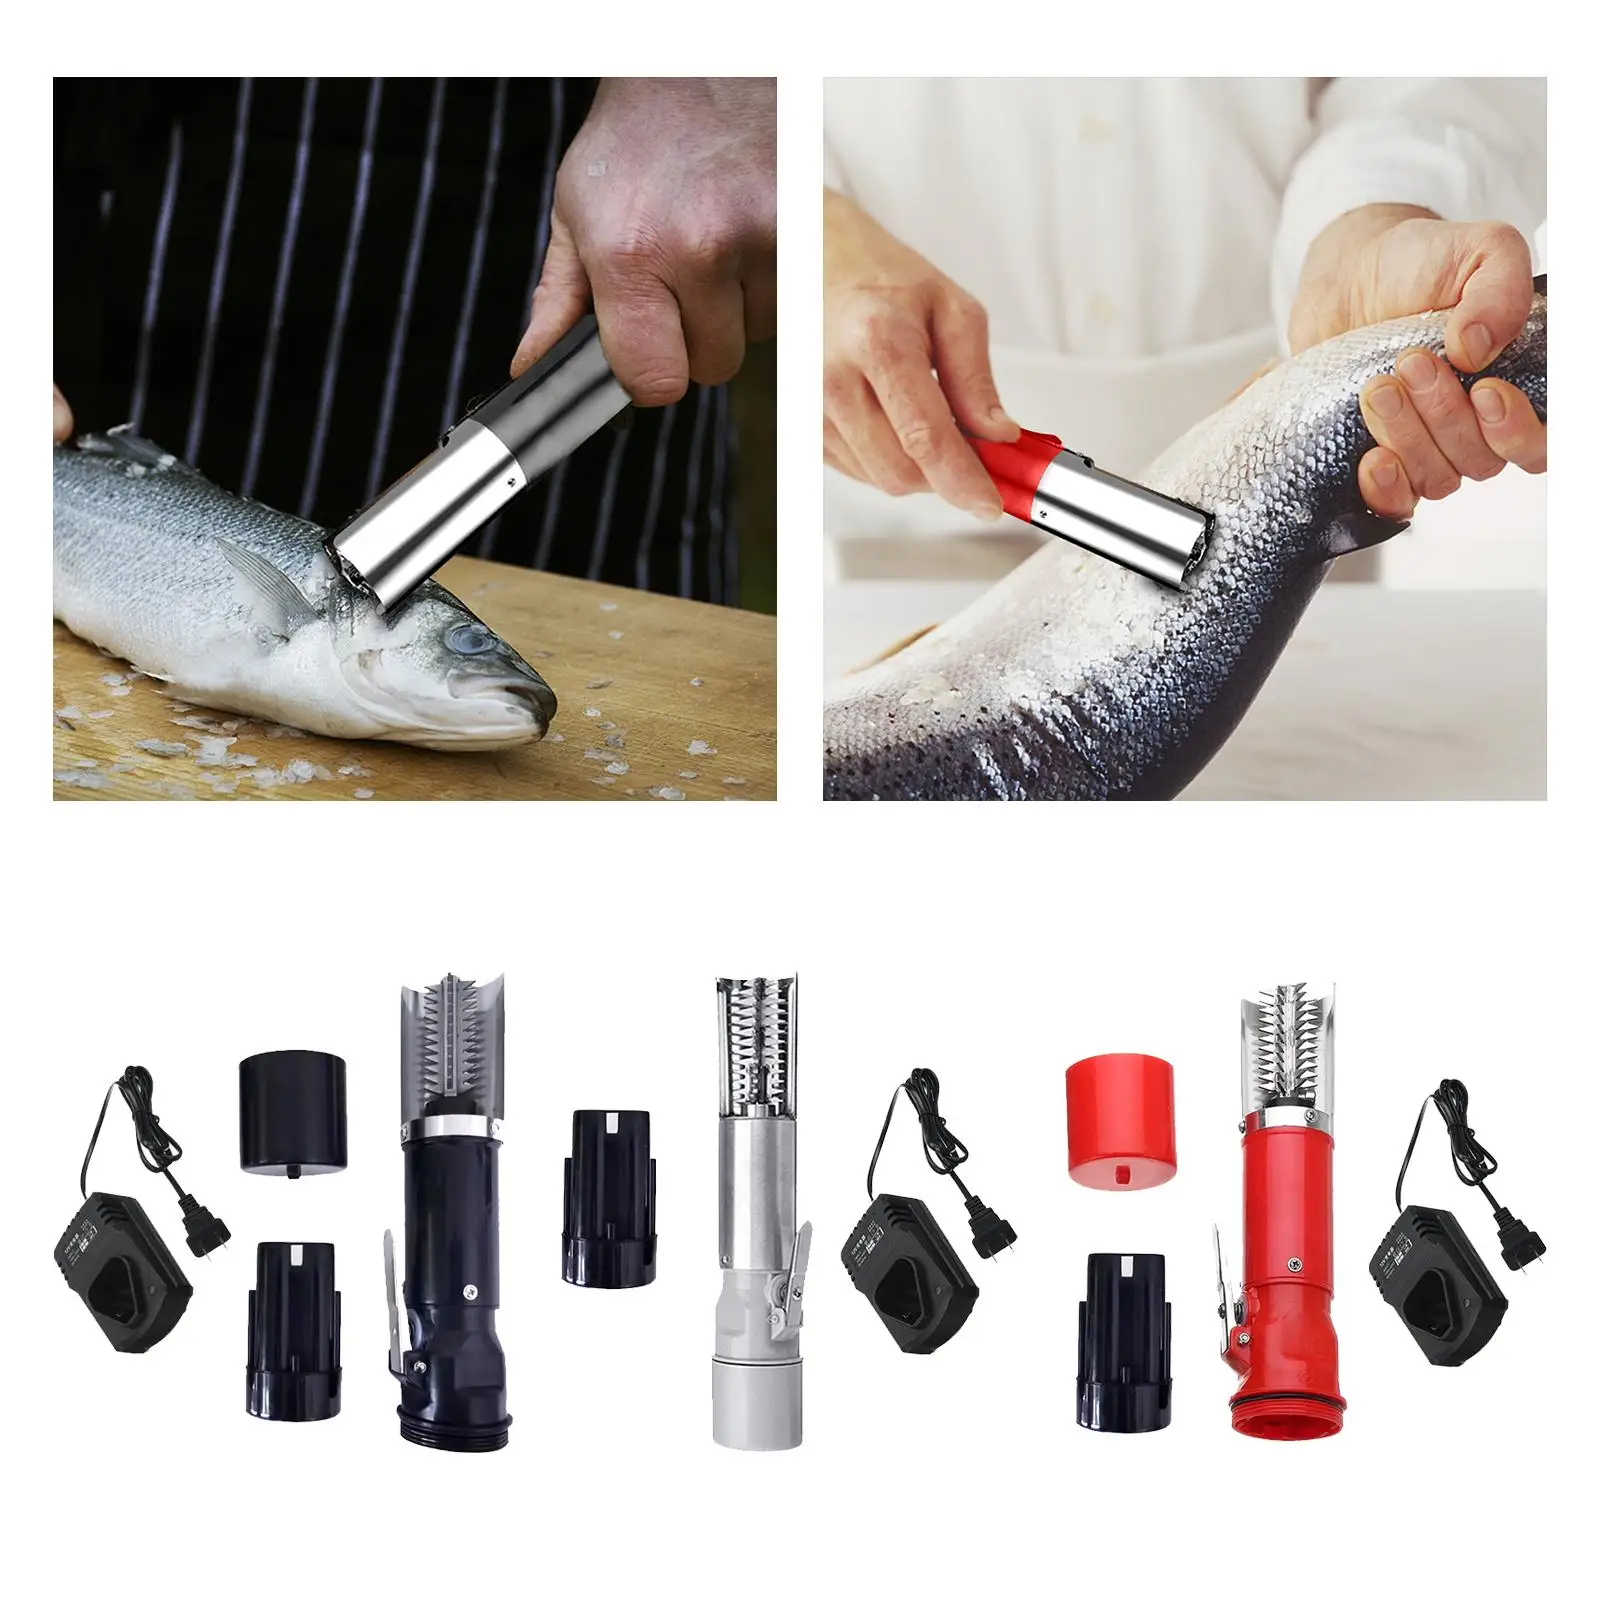 Portable Powerful Fish Scaler Seafood Cleaning Tool Fish Scale Remover Descaler Fish Cleaning Tools for Hotel Home Kitchen